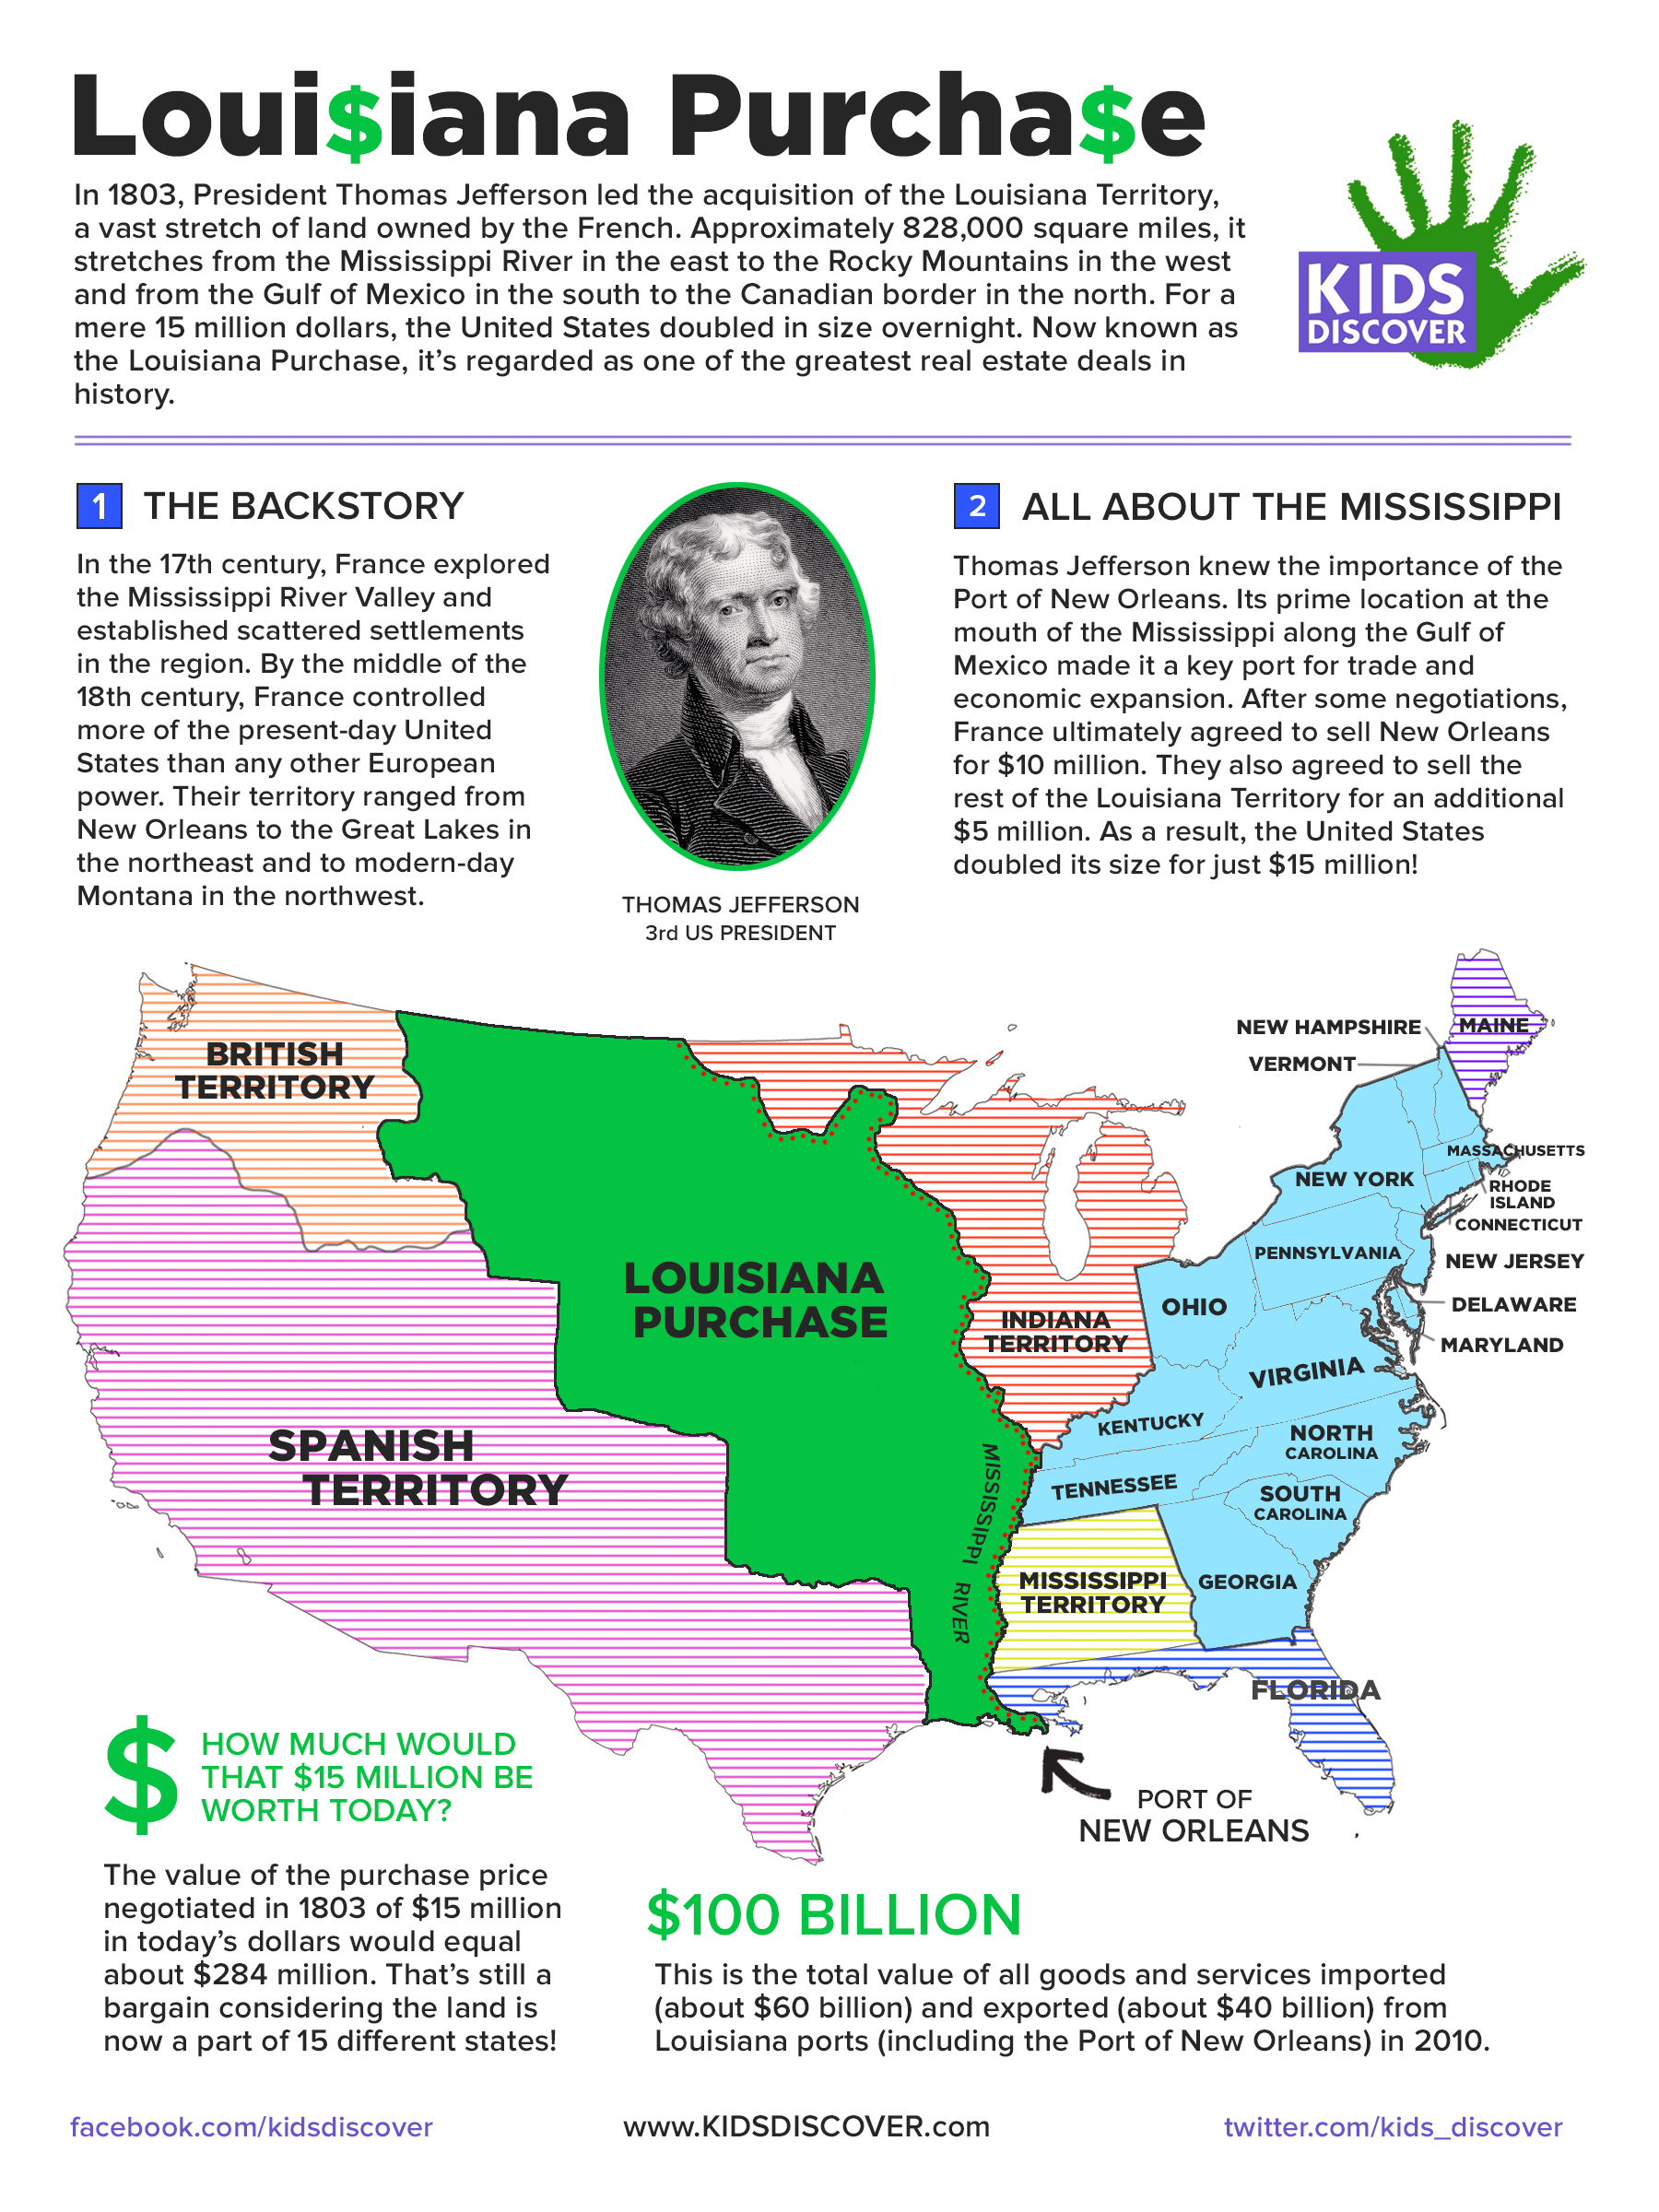 Infographic: The Louisiana Purchase - Kids Discover